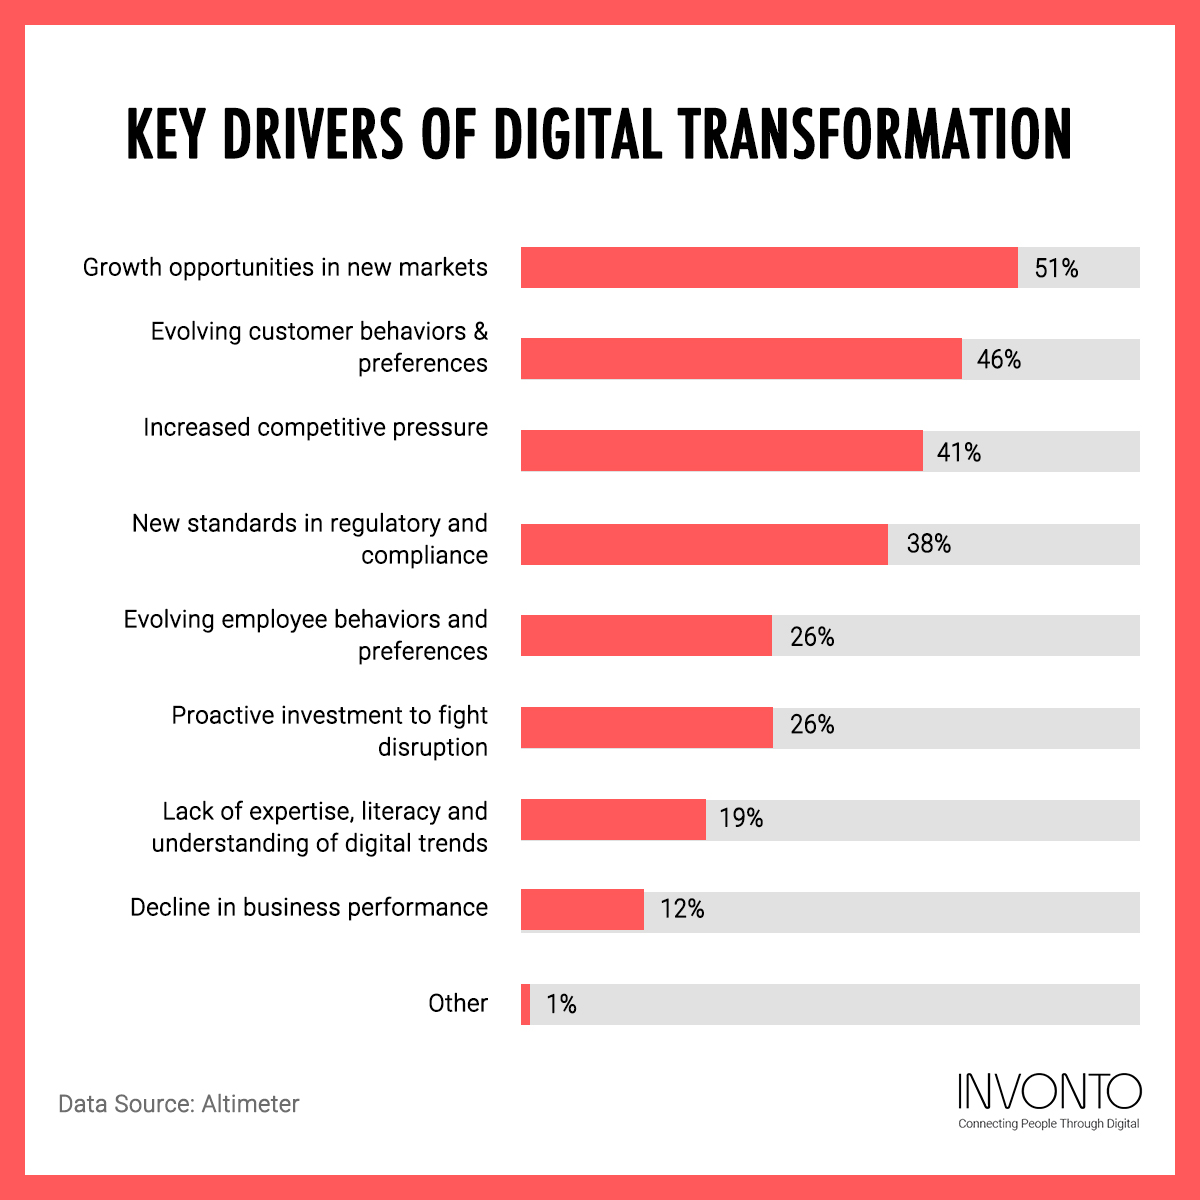 Key Drivers of Digital Transformation Strategy infographic by Invonto